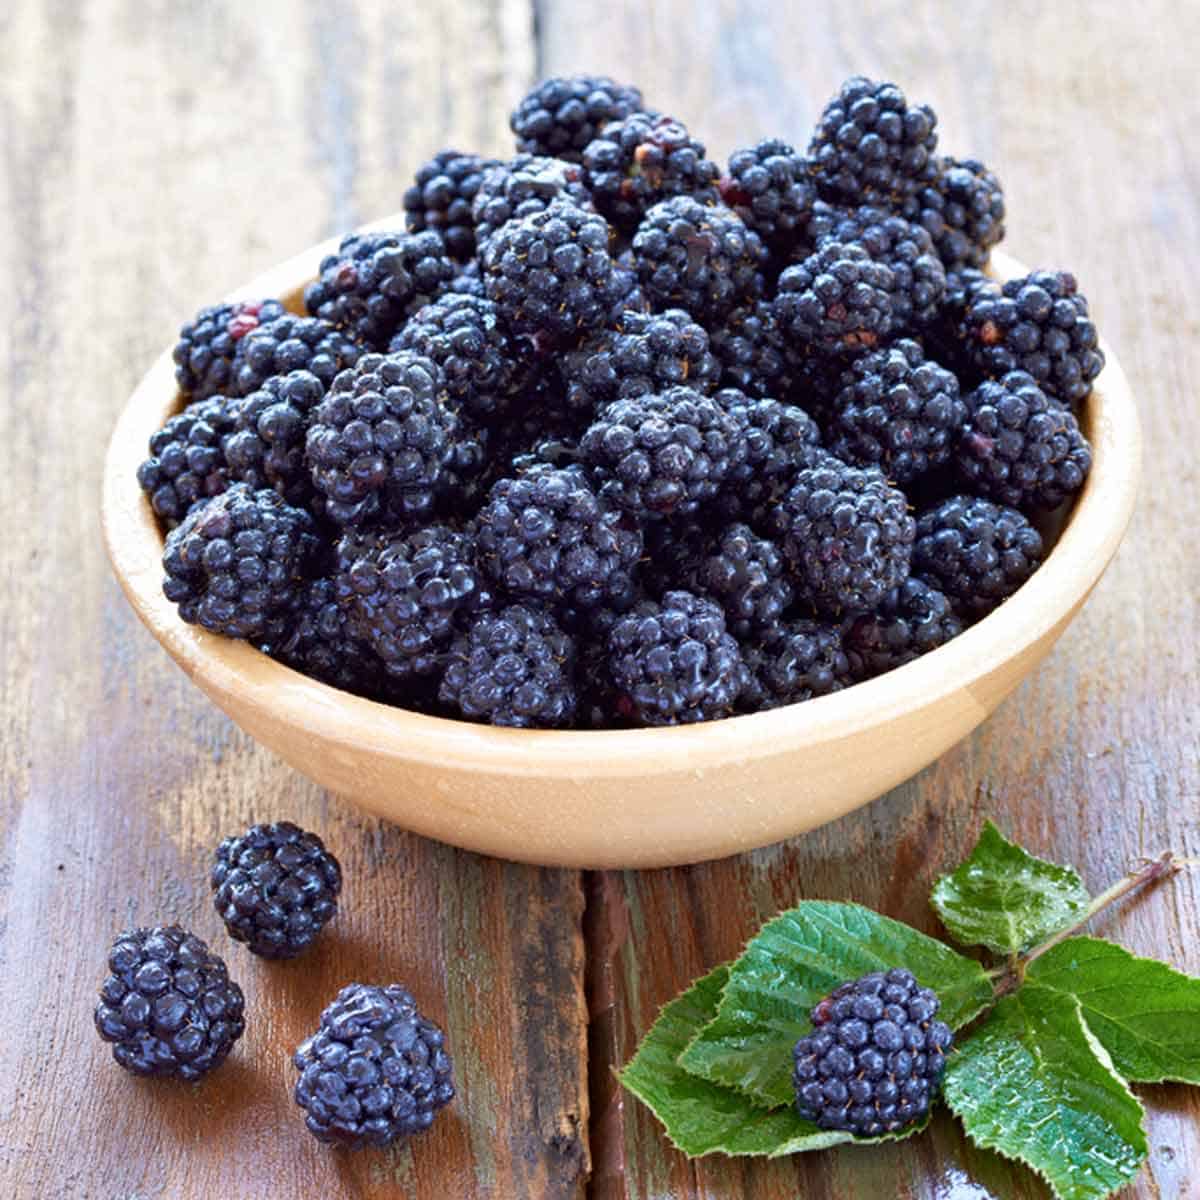 A wooden bowl filled with fresh blackberries.